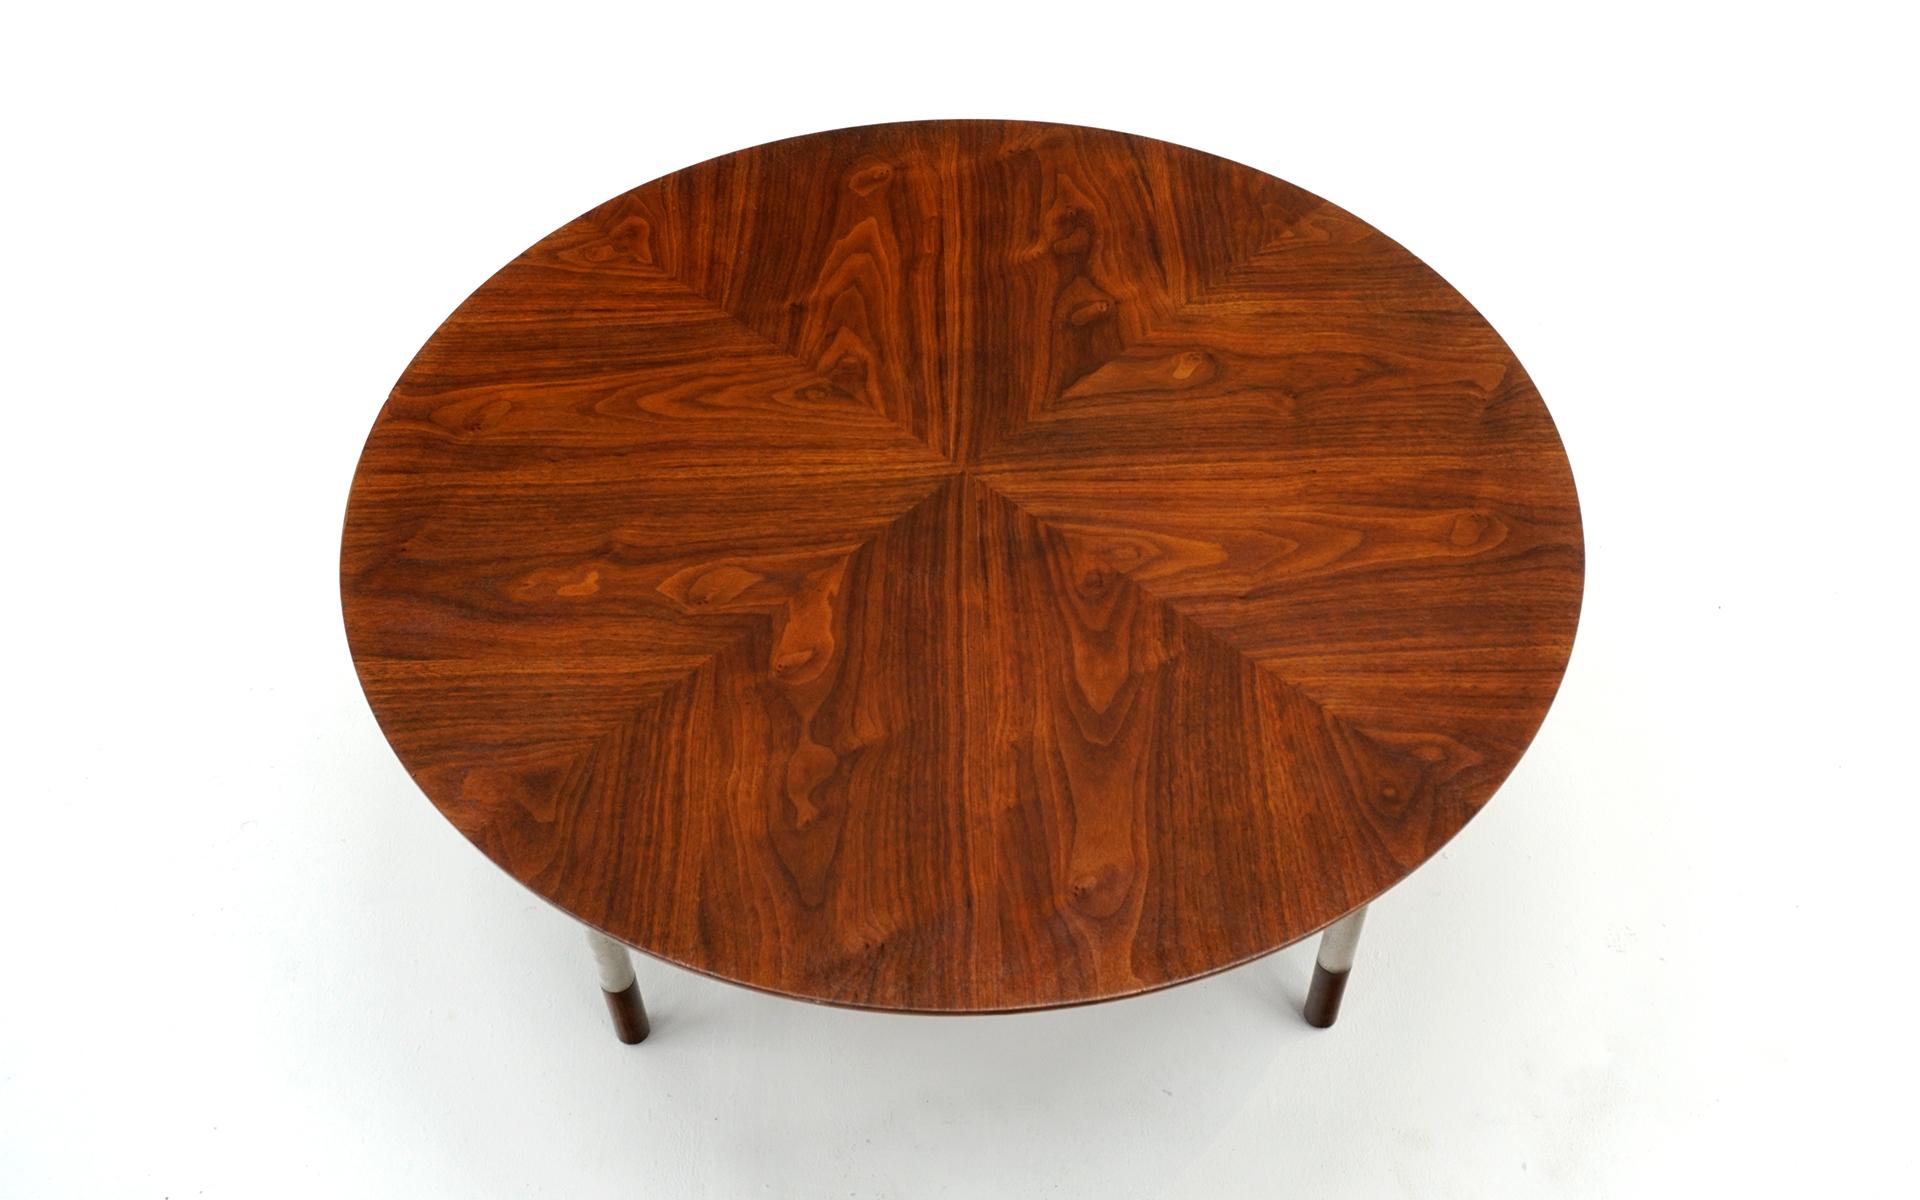 Round rosewood coffee table with chrome legs with rosewood accents. Made by Jack Cartwright in the style of Finn Juhl.